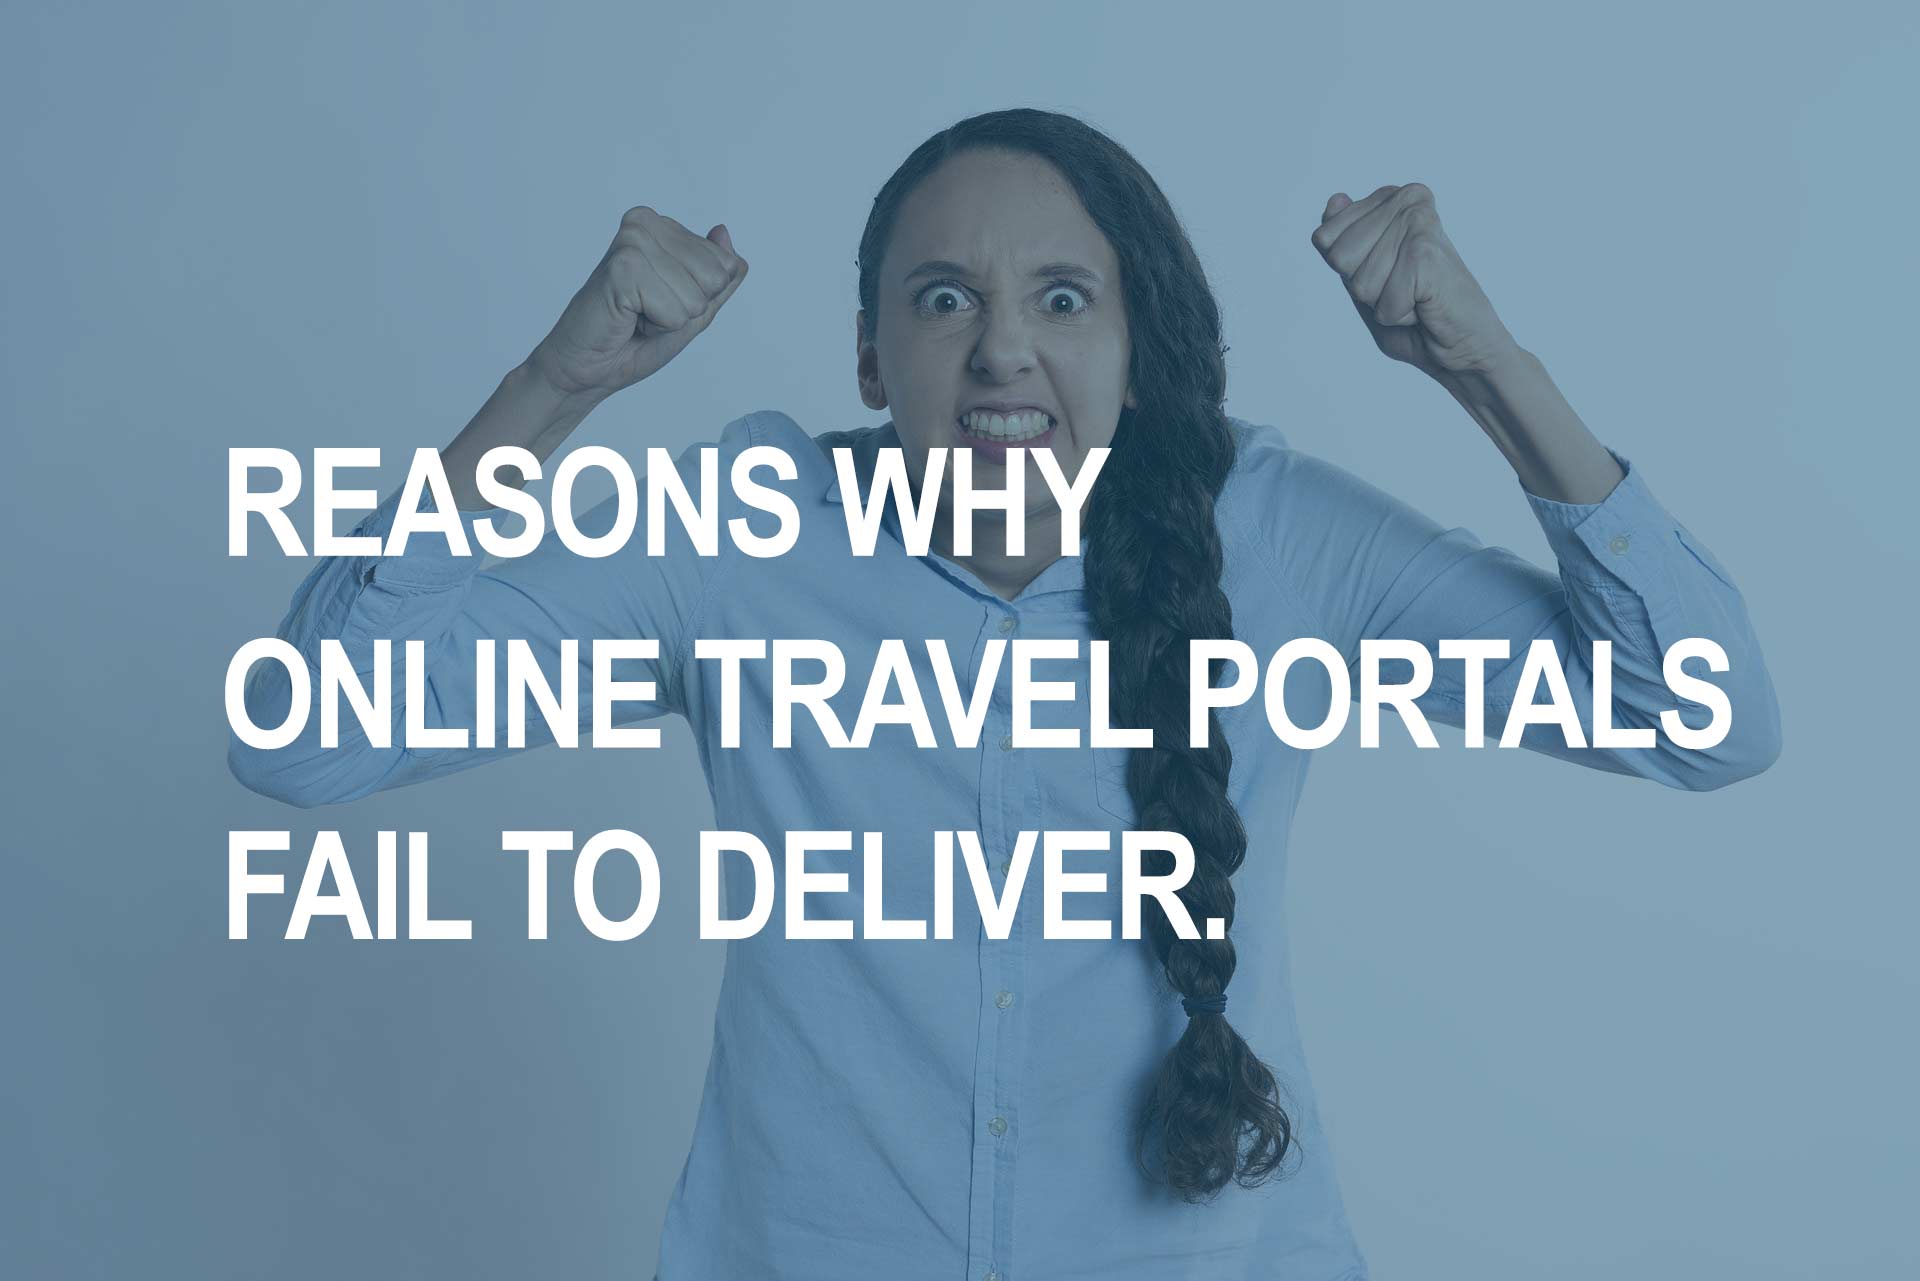 Why Online Travel Portals fail to deliver?